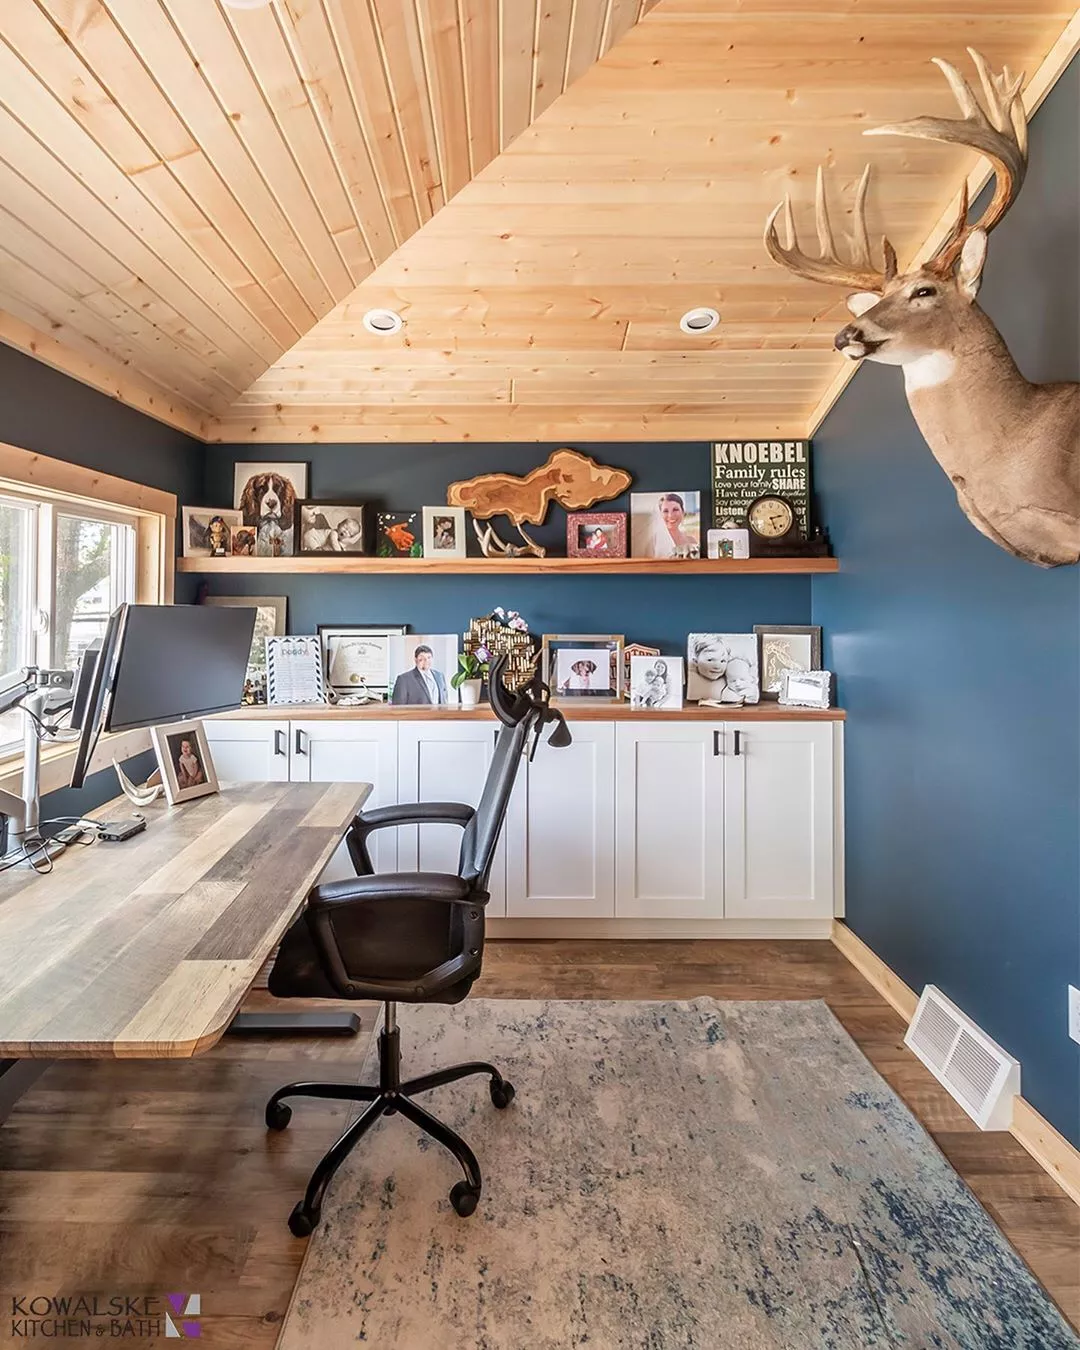 How to Design a Man Cave: 18 Ideas & Tips | Extra Space Storage